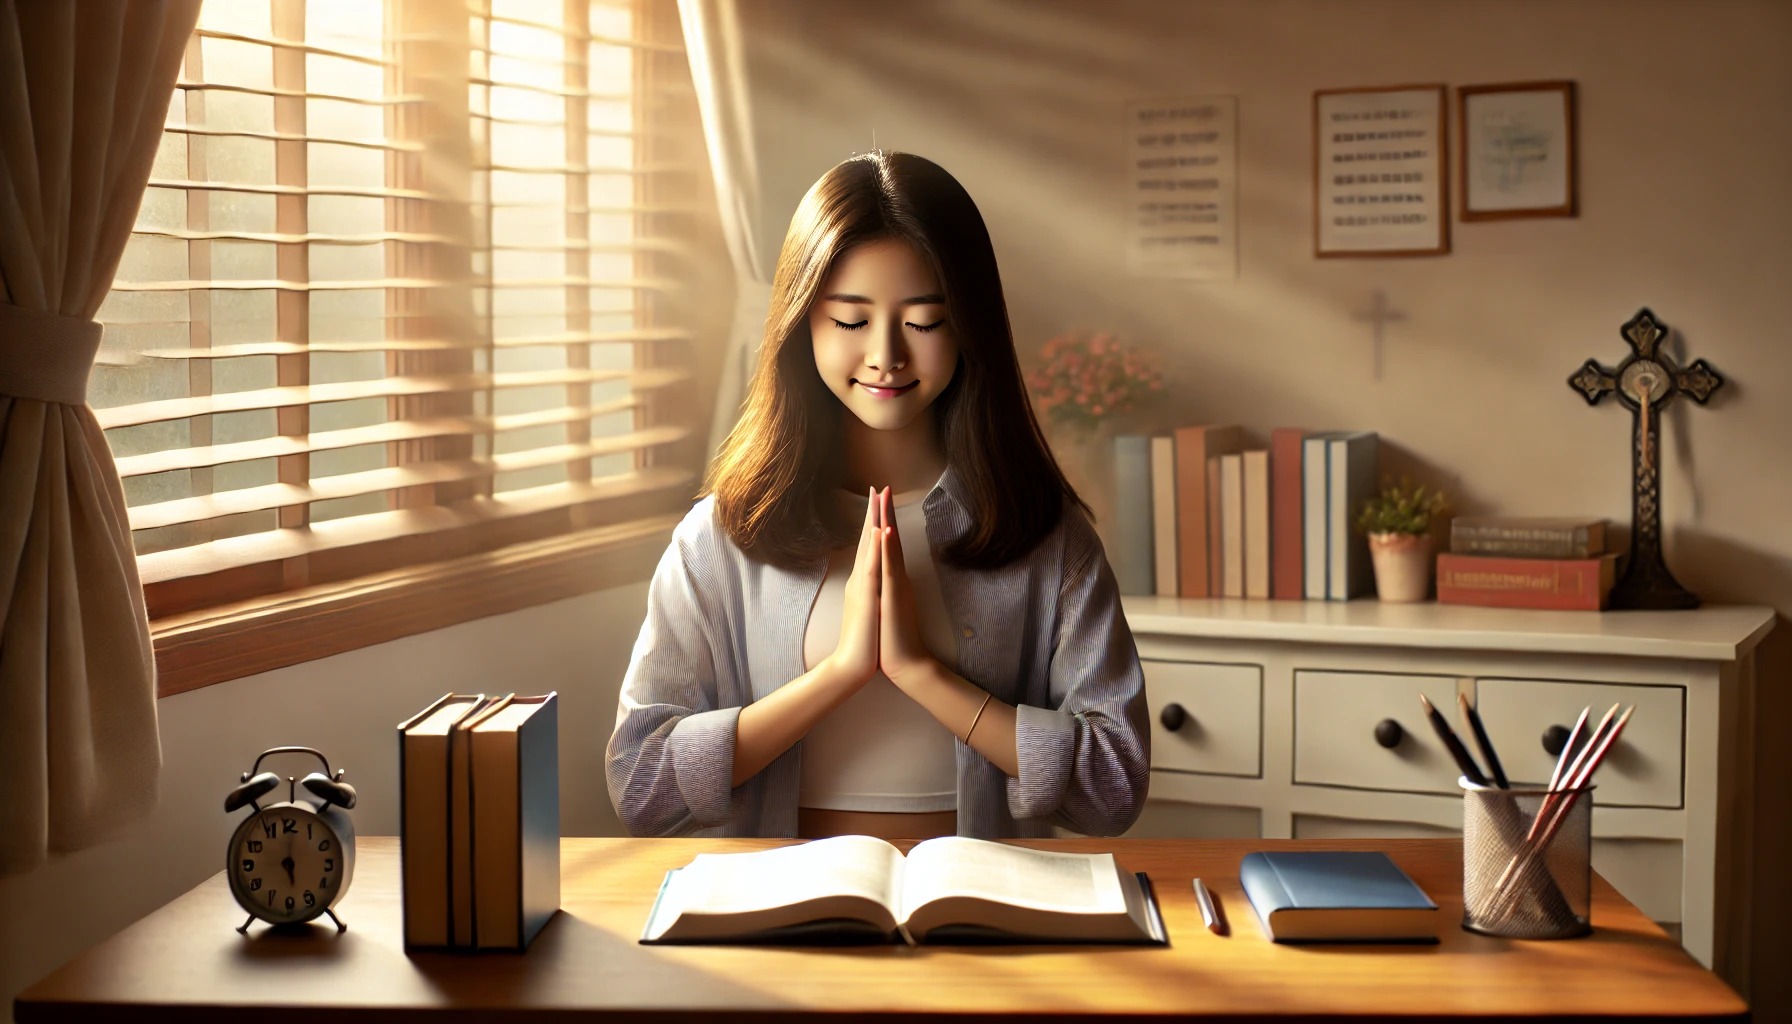 15 Prayers For Students